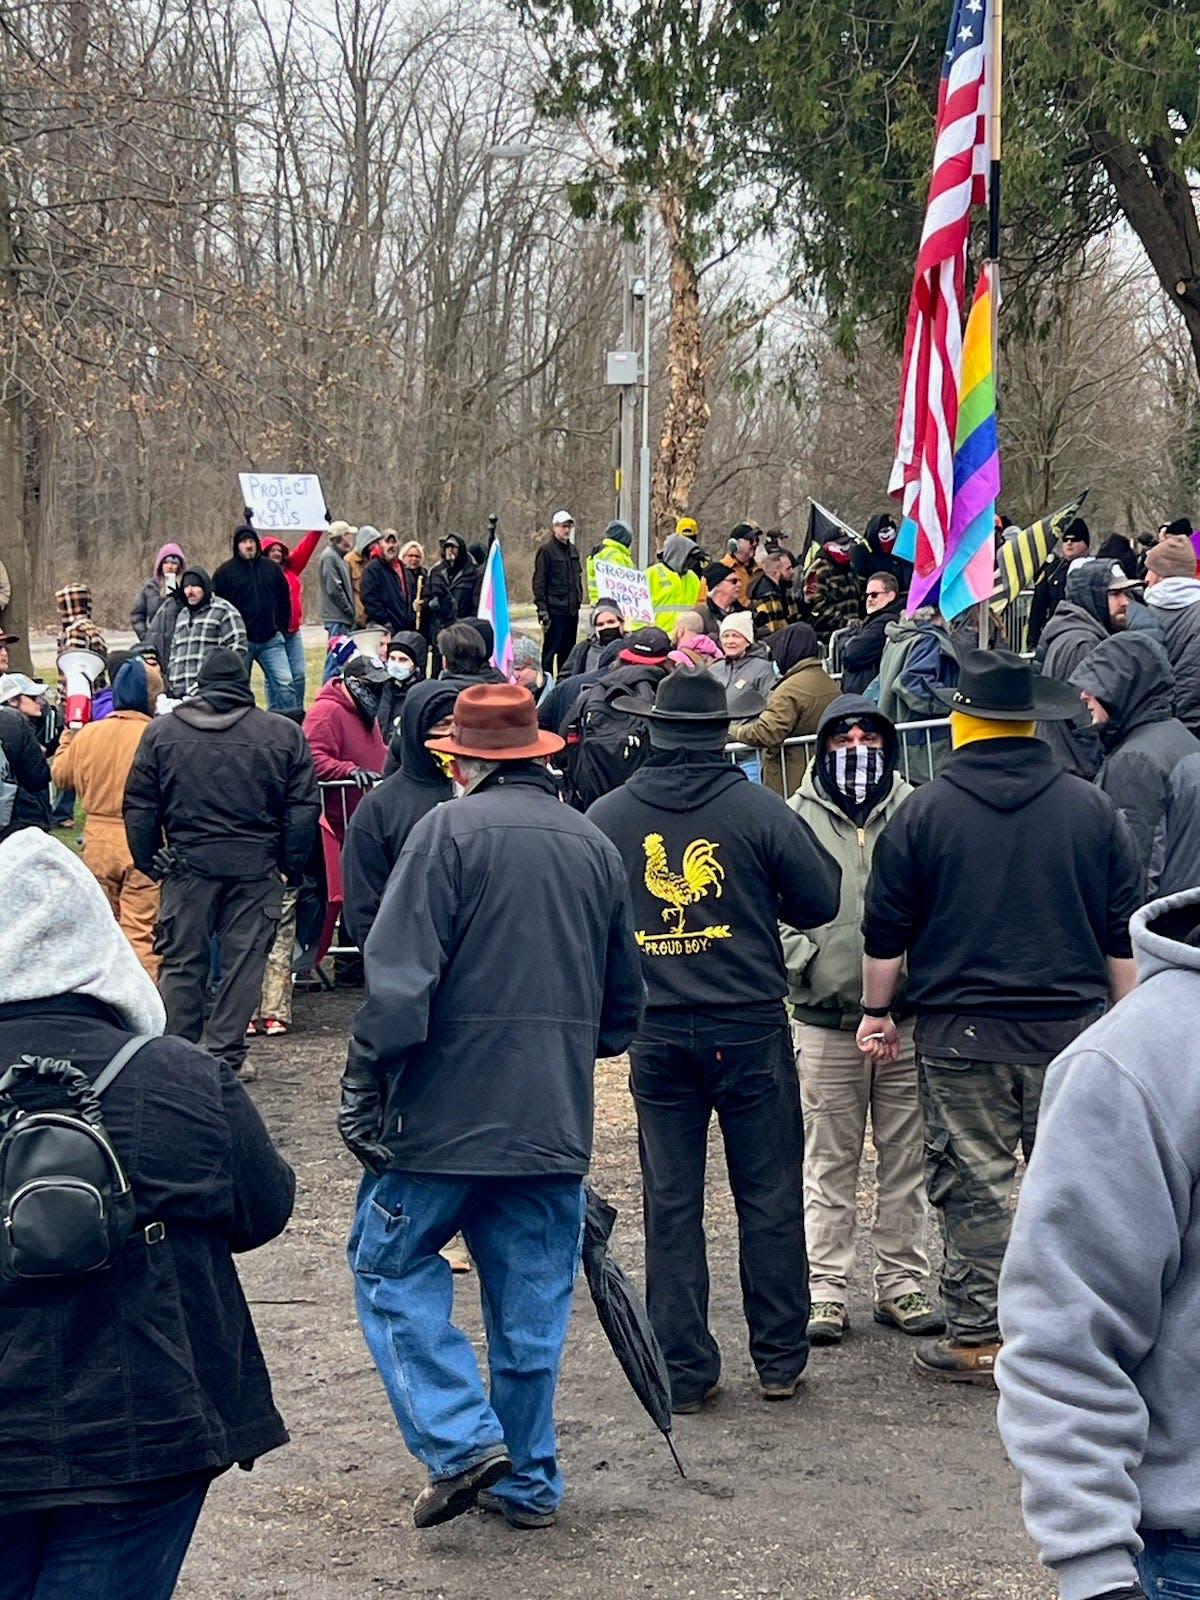 Dozens of people demonstrate at the "Rock-n-Roll Humanist Drag Queen Story Hour" in March at Memorial Park in Wadsworth, Ohio. One of the groups that showed up was the neo-Nazi Blood Tribe, which now claims to have started an Ohio-based chapter.